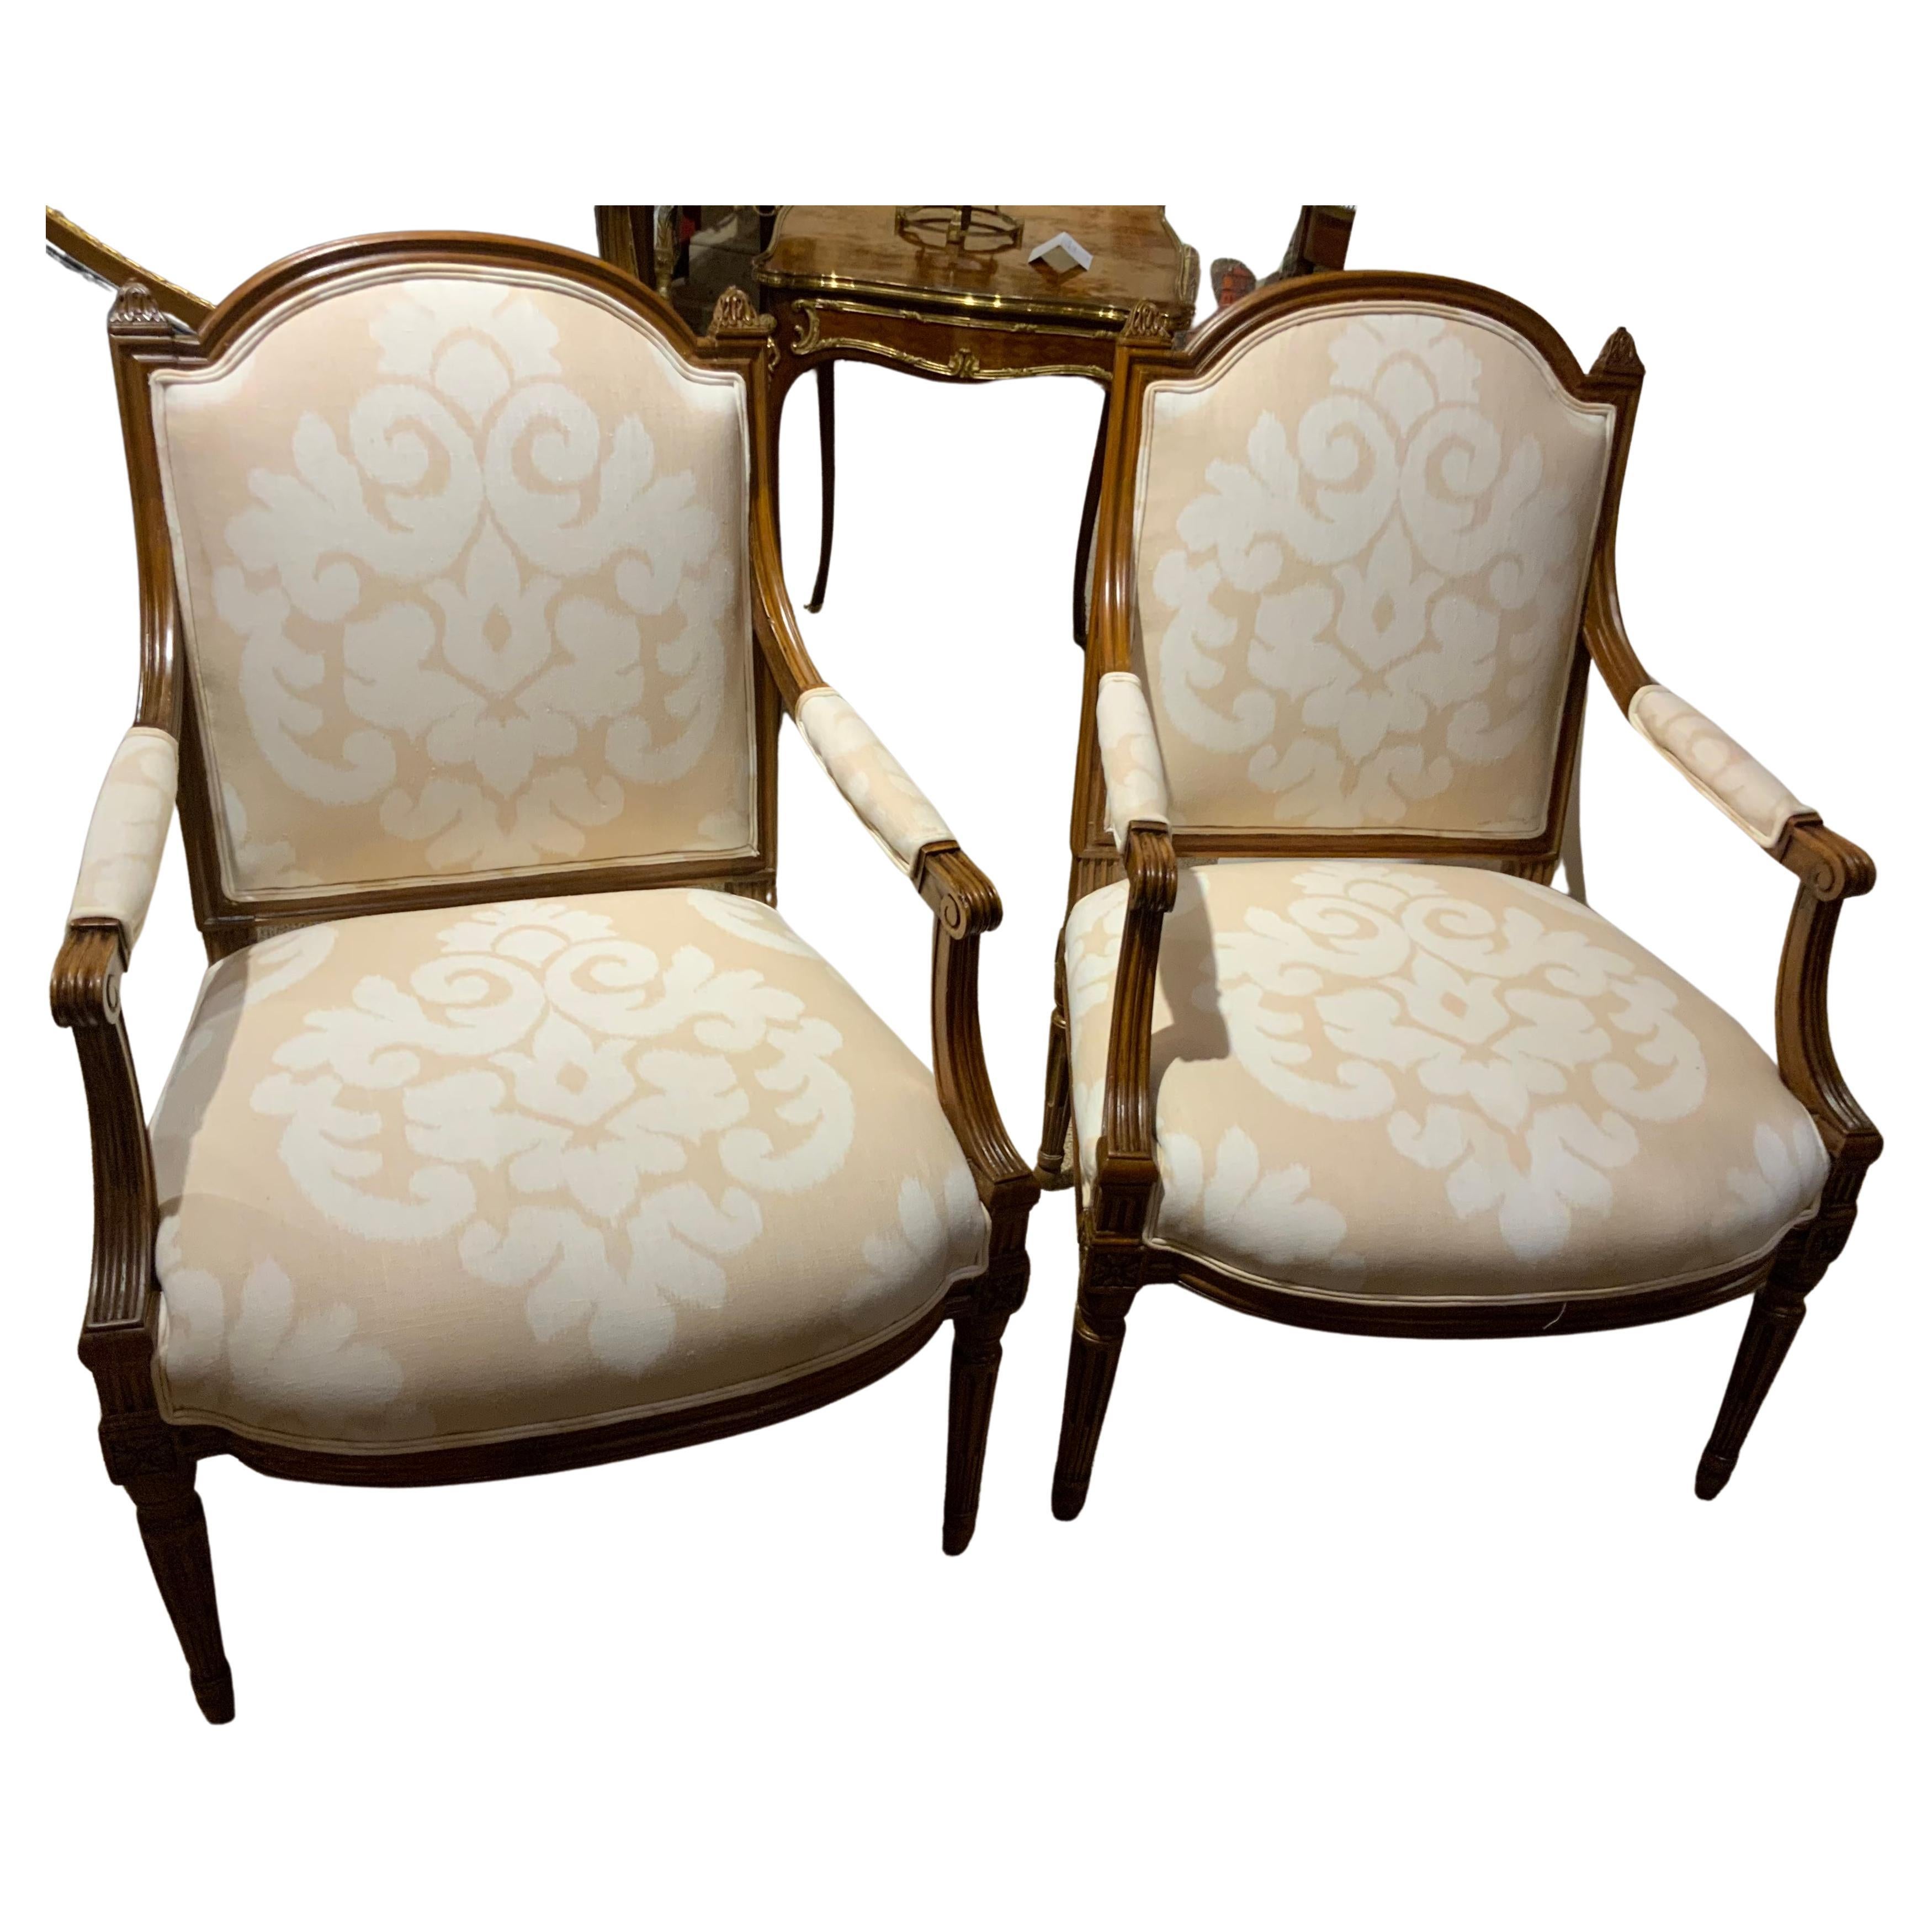 Pair of Walnut Louis XVI—Style Arm Chairs 19th Century with Domed Back